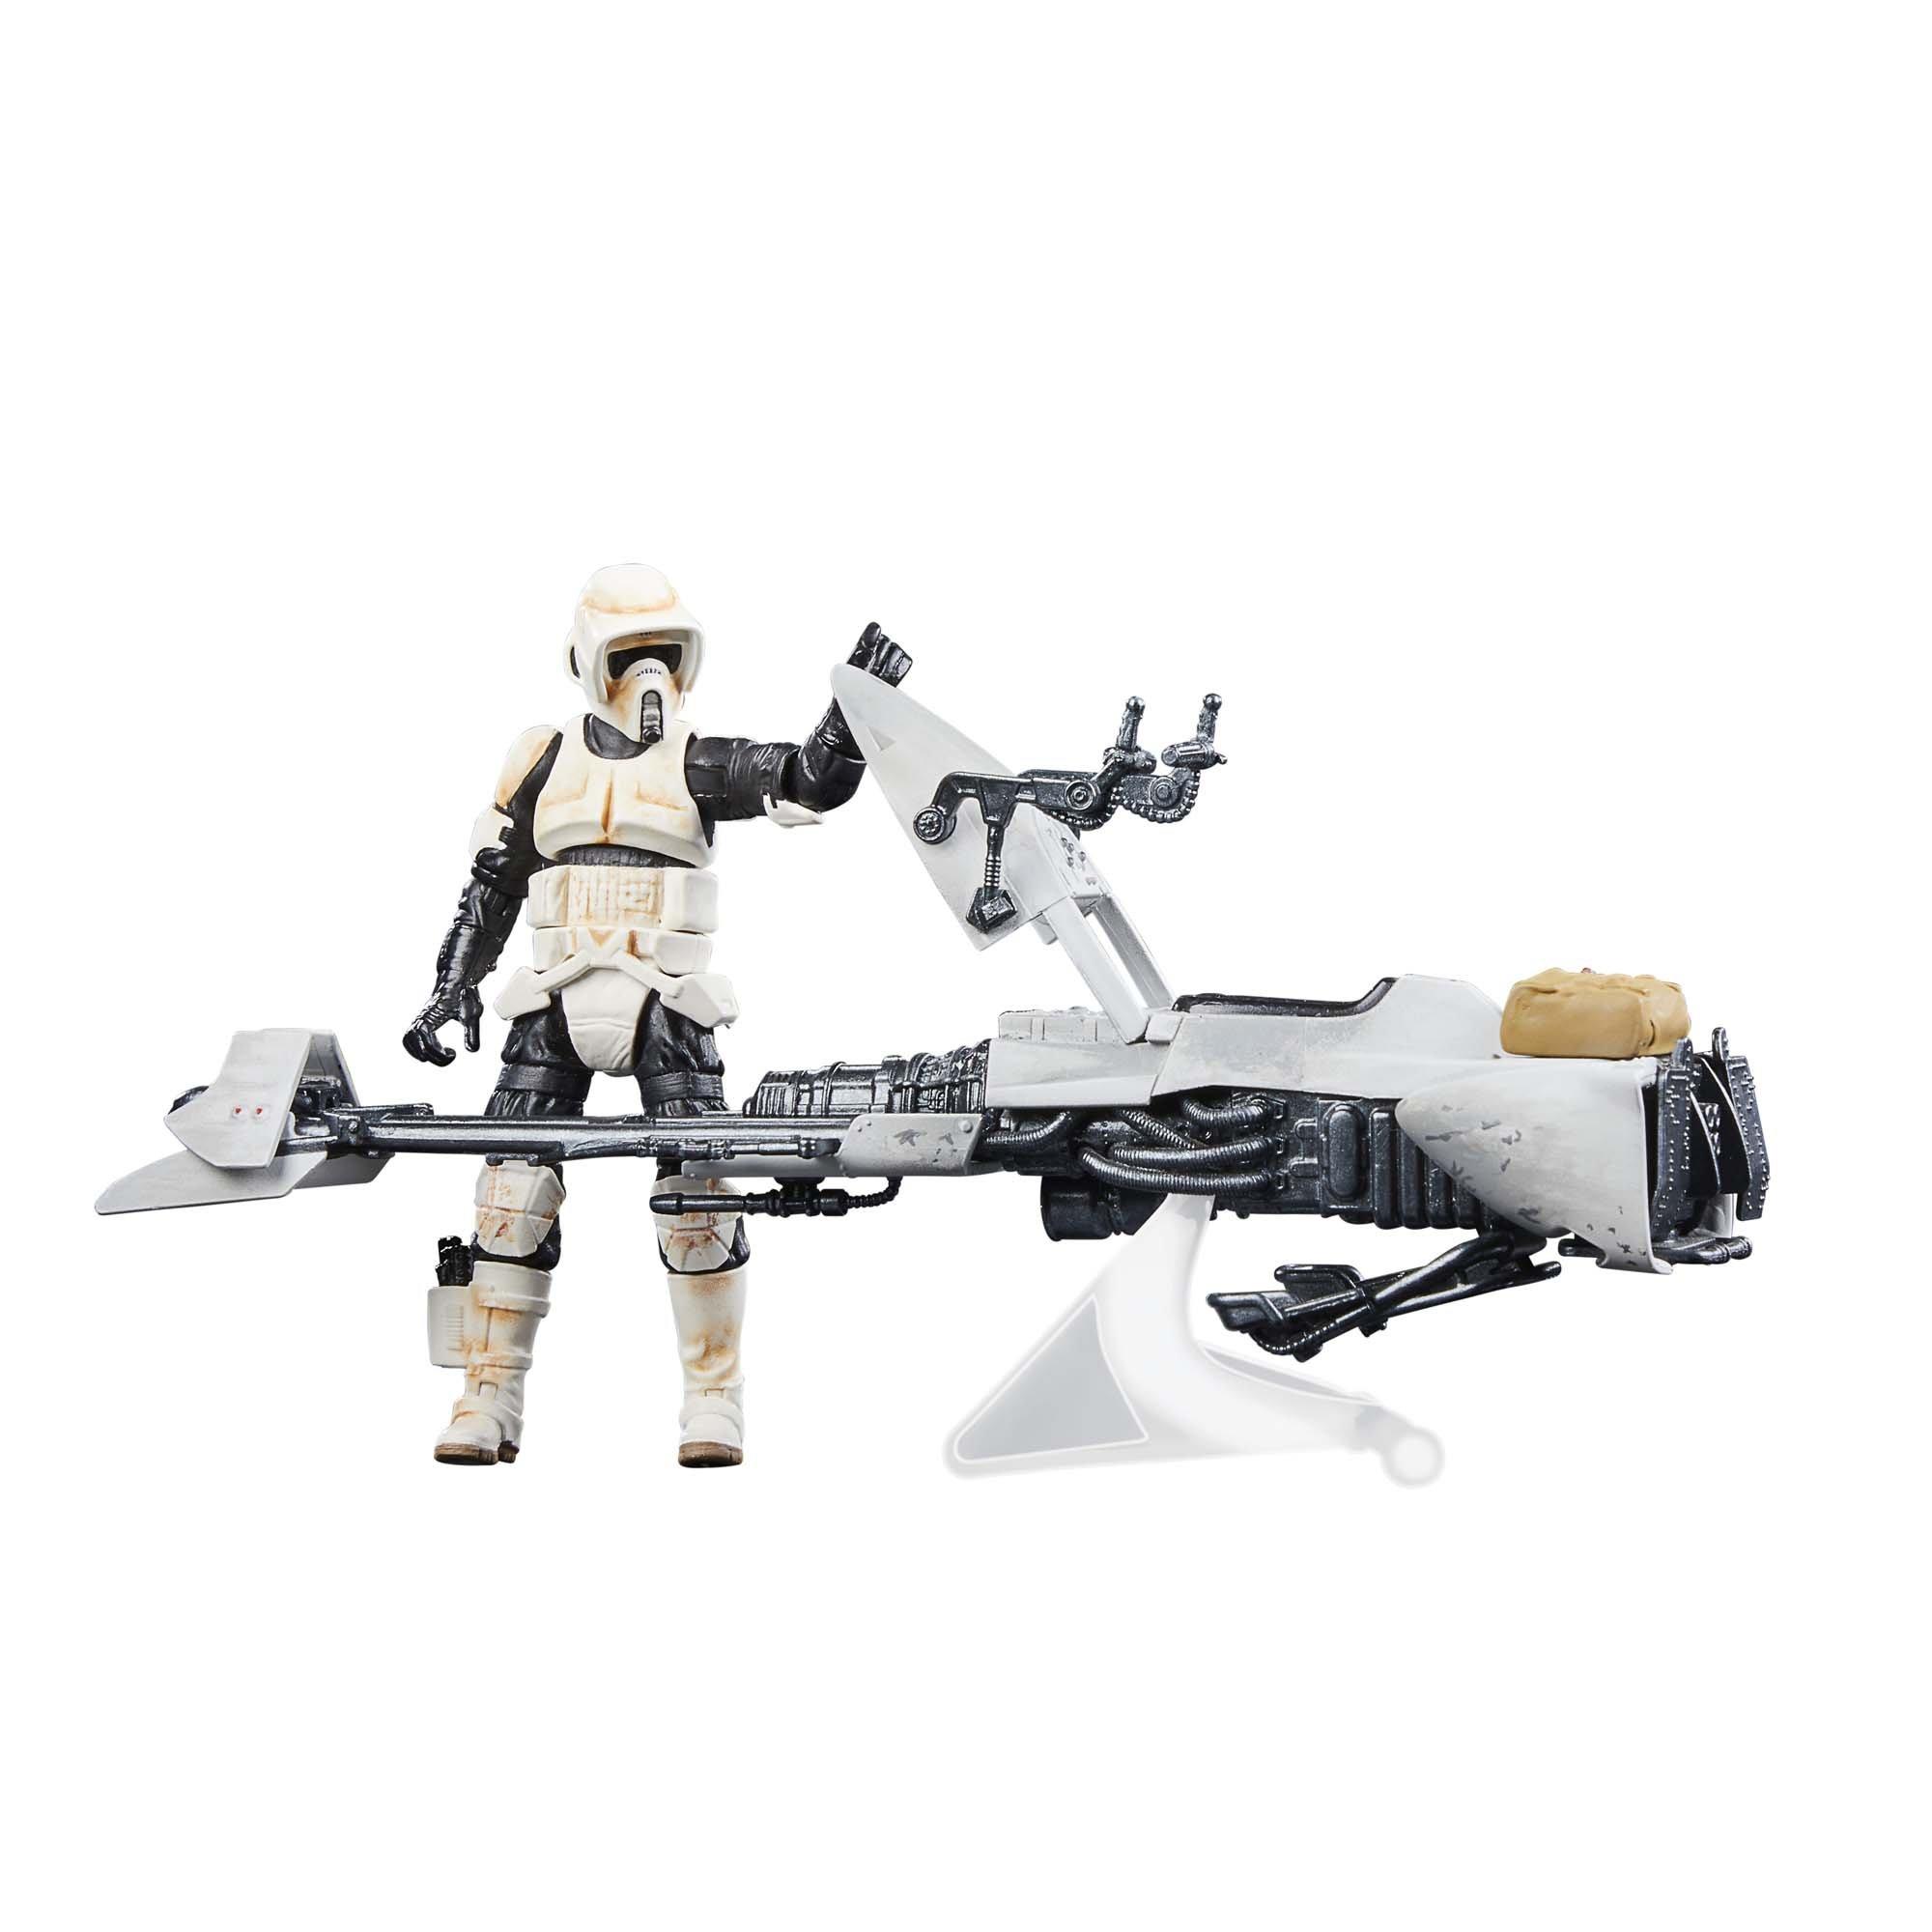 Hasbro Star Wars Vintage Collection Star Wars: The Mandalorian Speeder  Bike, Scout Trooper and Grogu 3.75-in Vehicle and Action Figure